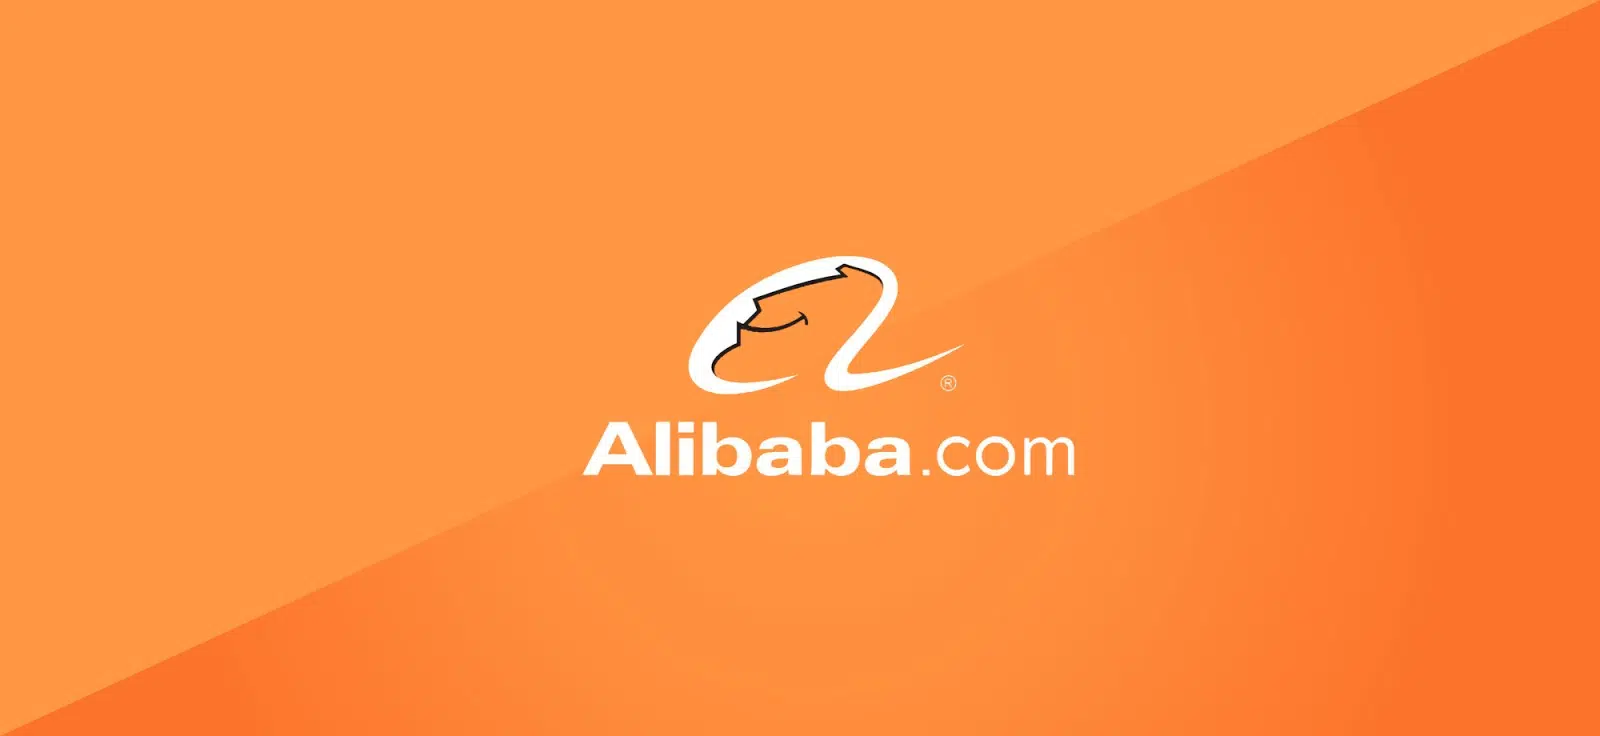 site grossiste chinois alibaba